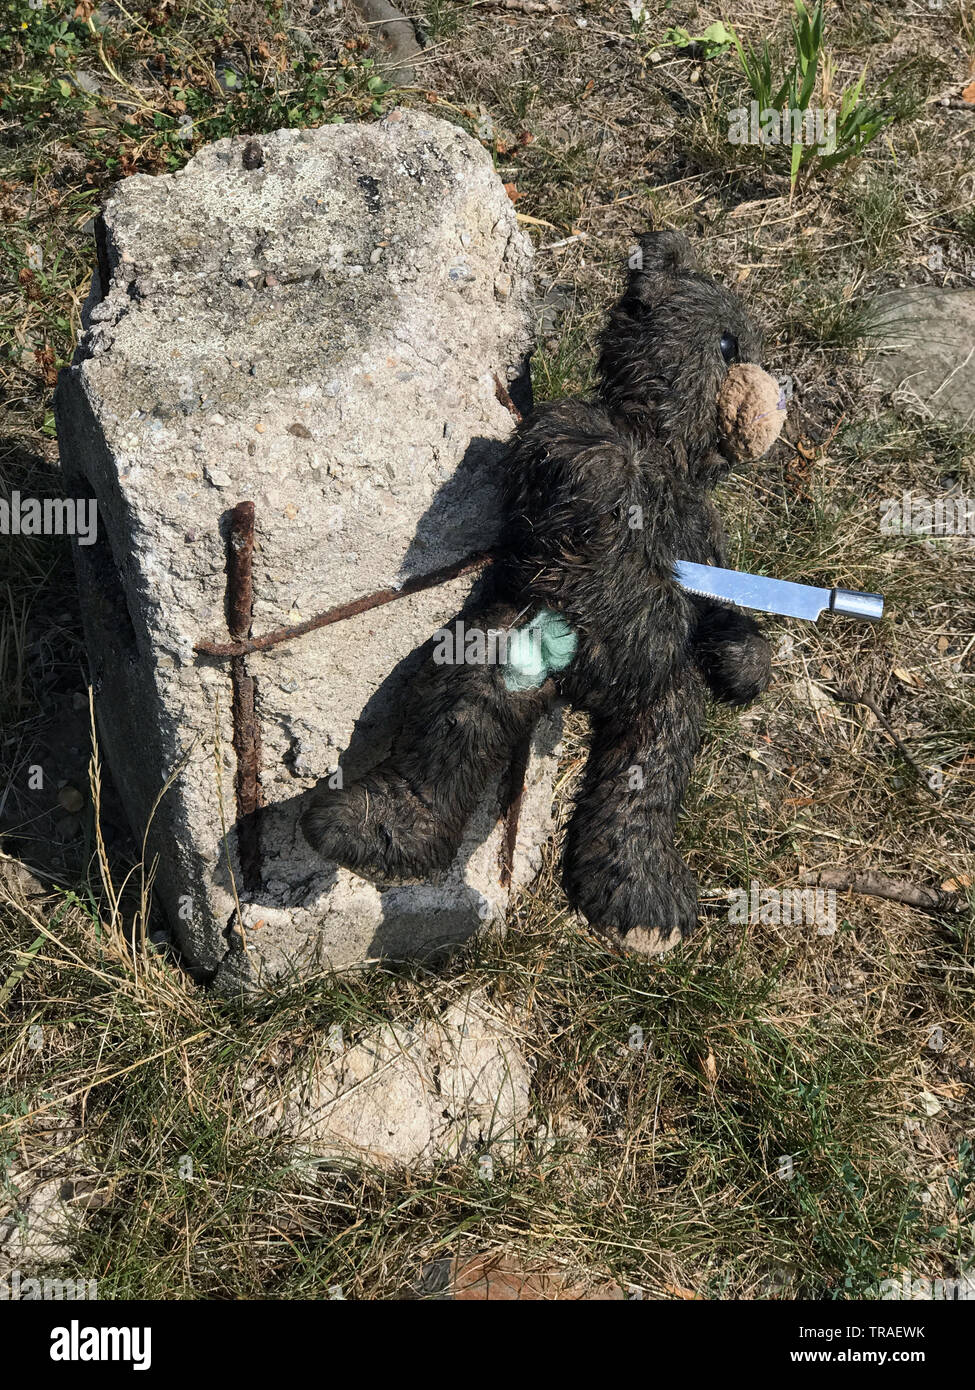 The plush teddy bear is pinned with knife to milestone  beside road. Stock Photo